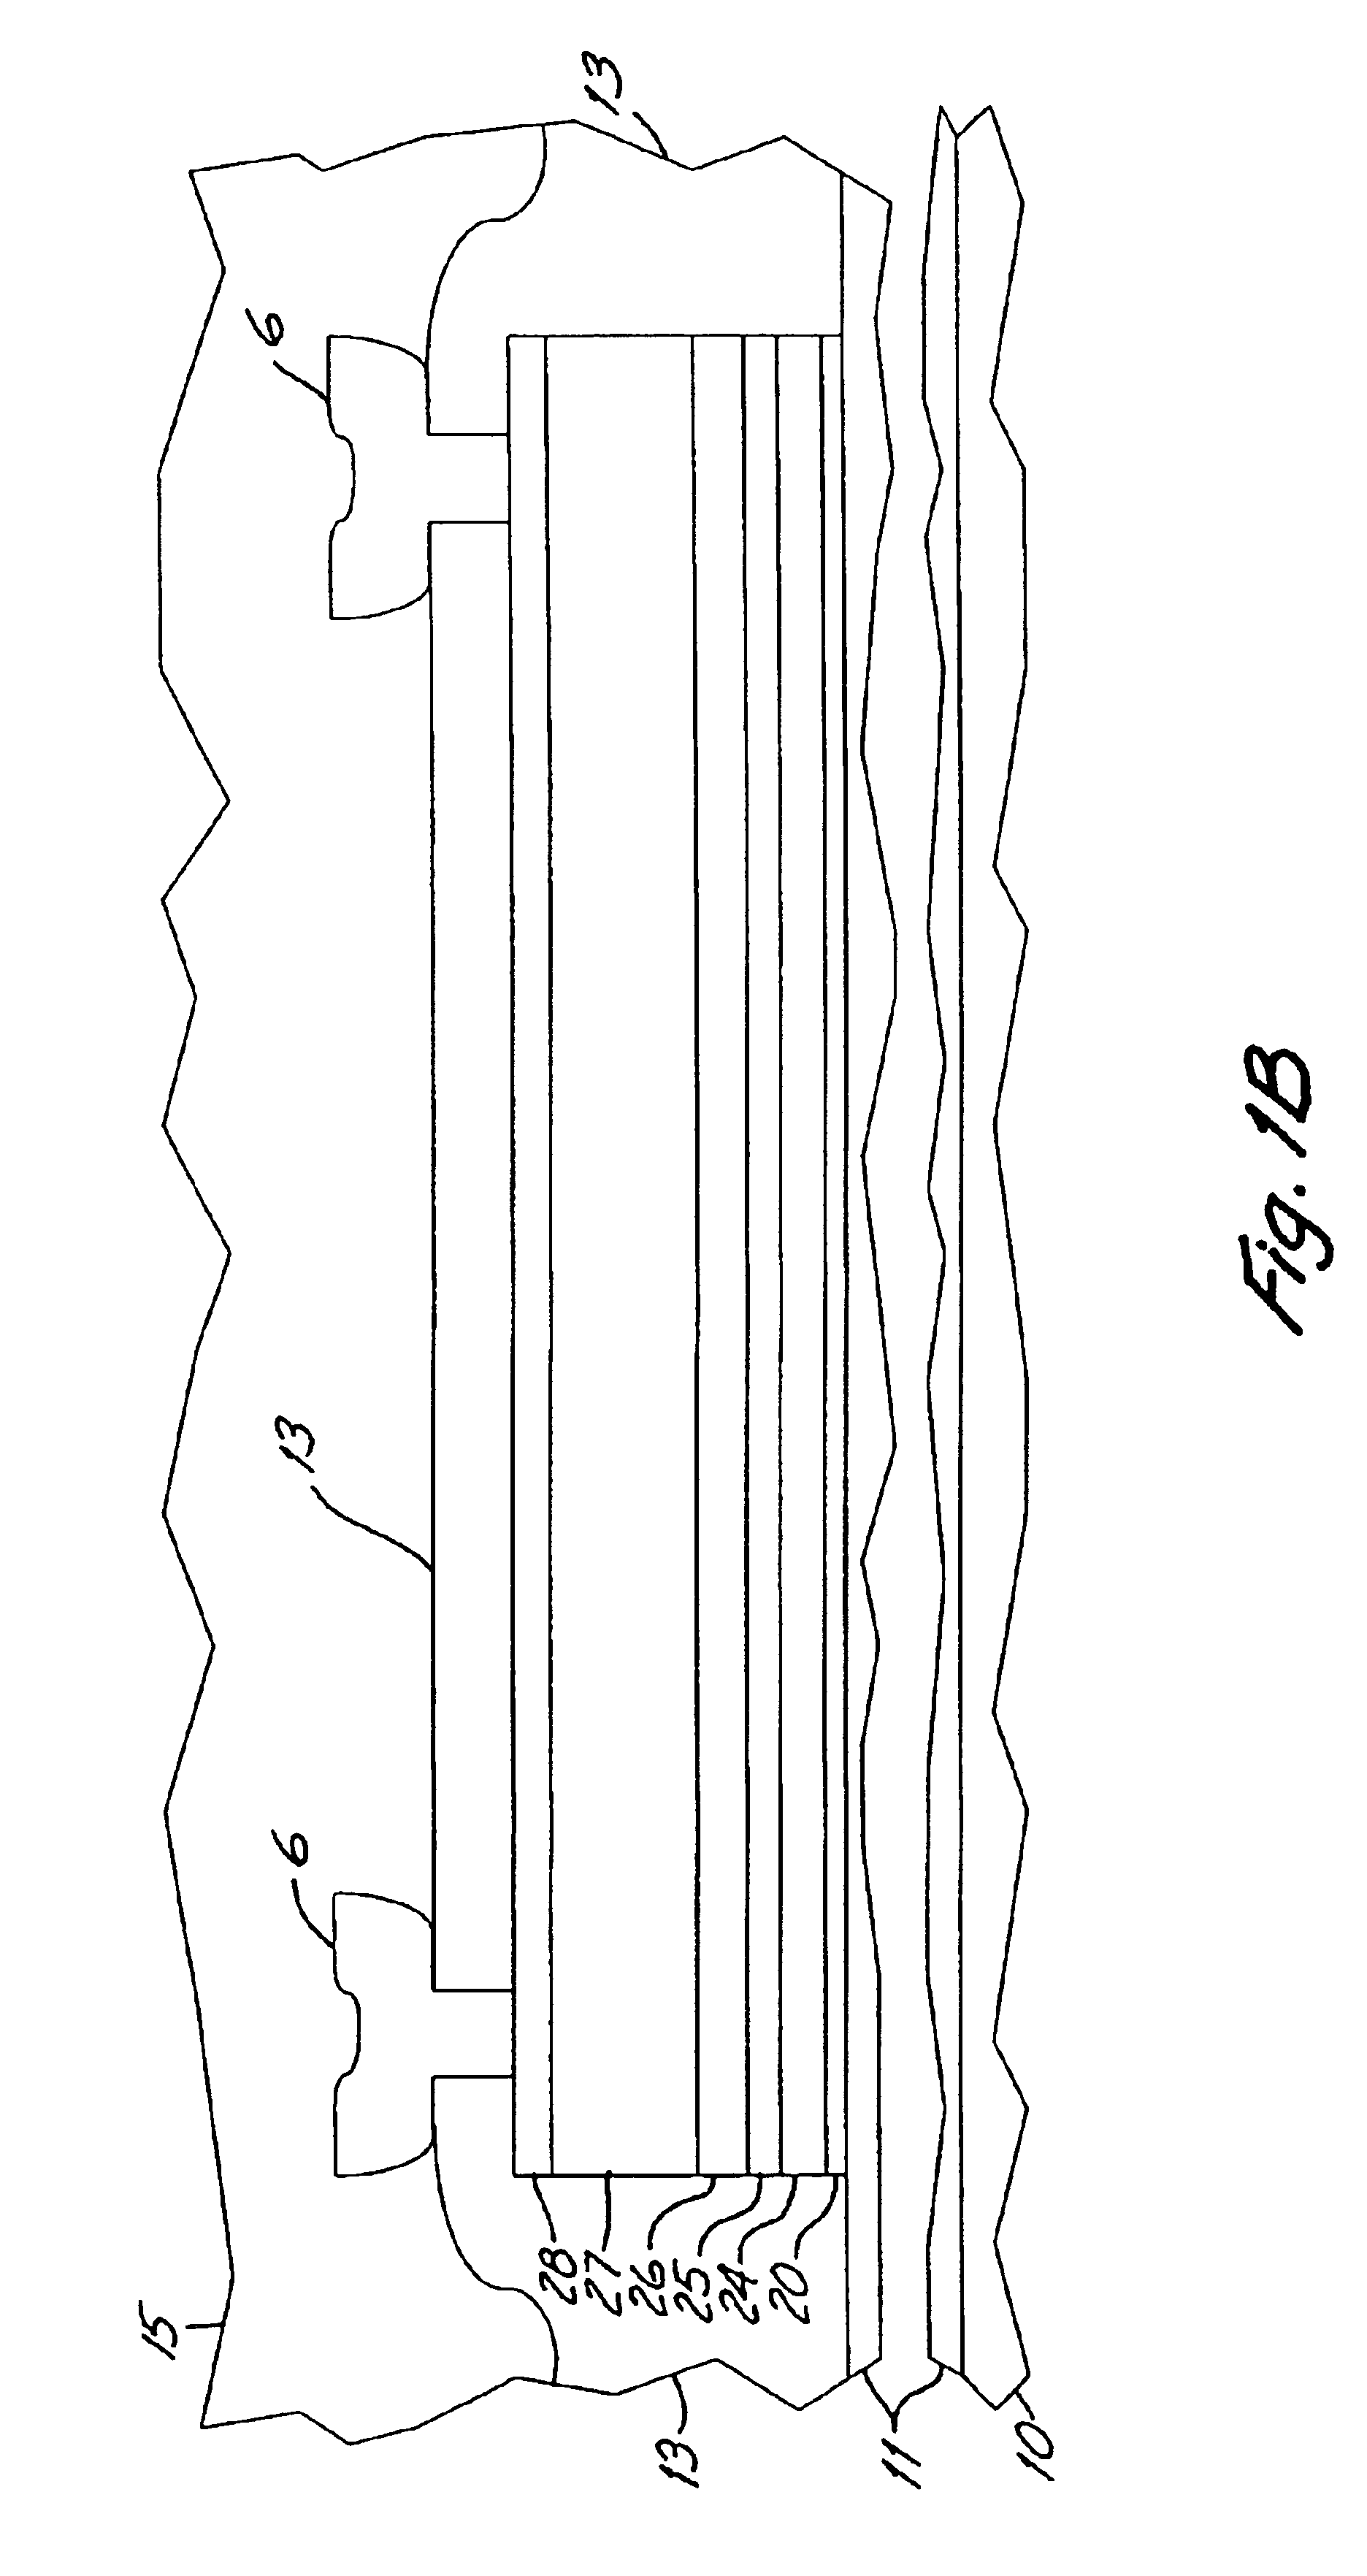 Magnetic field sensor with augmented magnetoresistive sensing layer